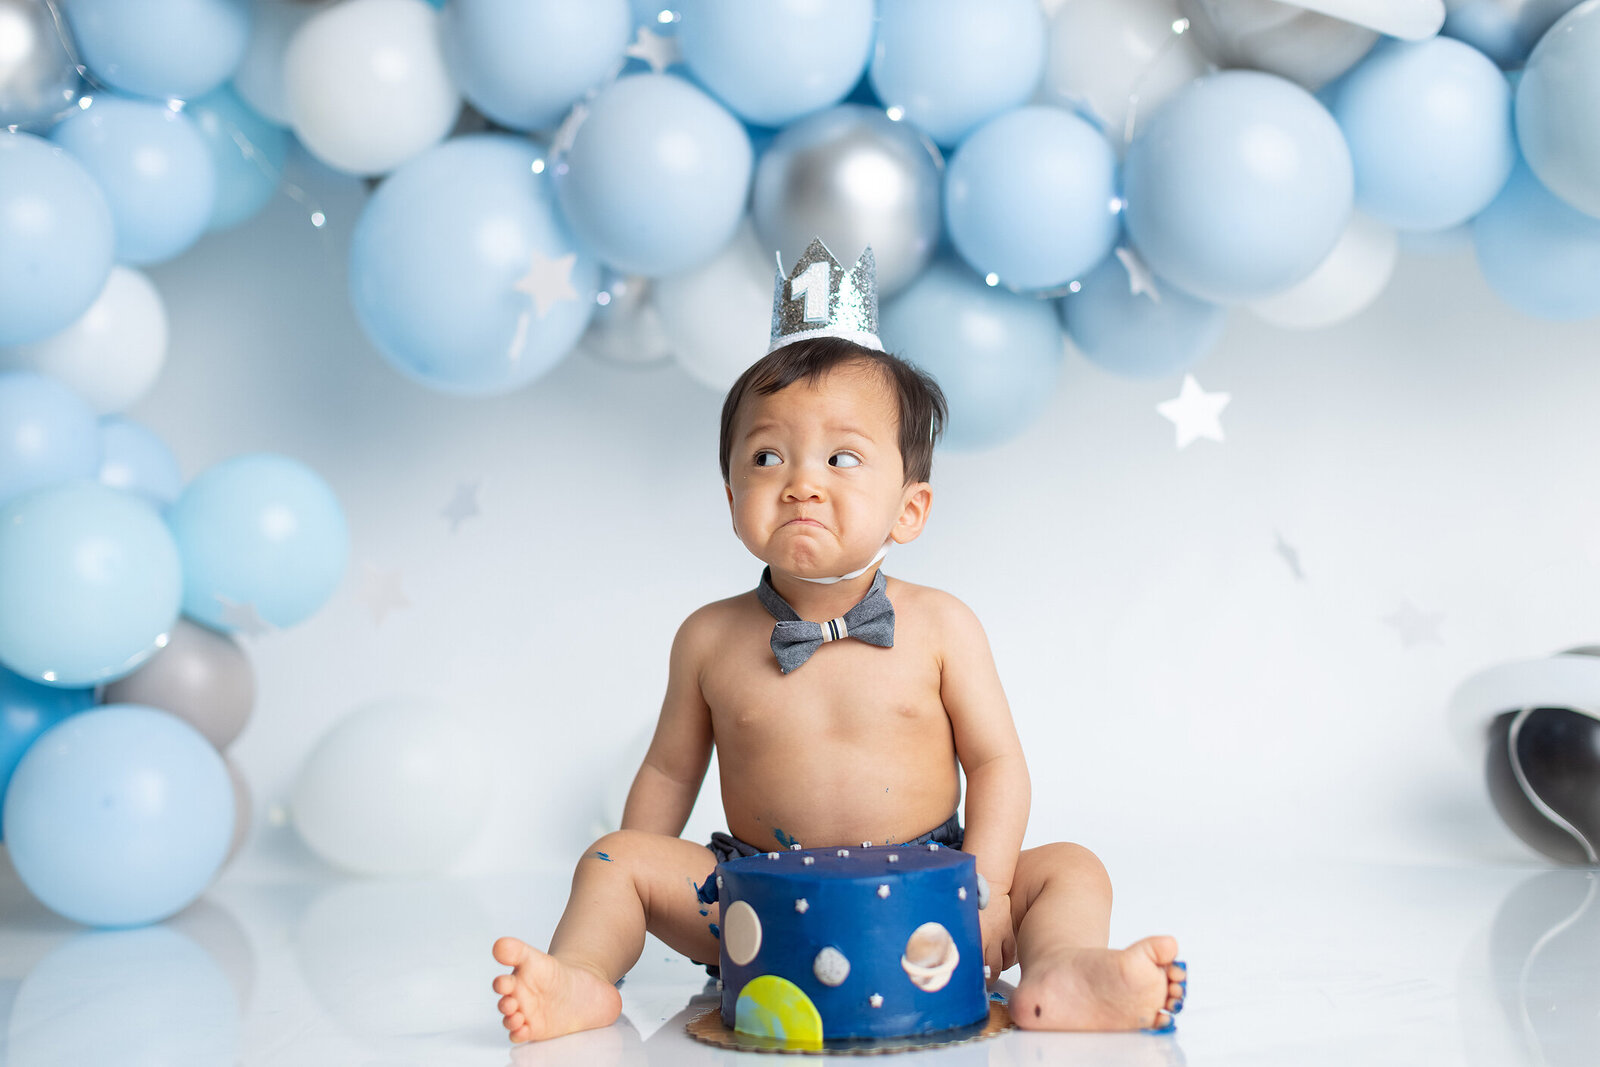 Baby making funny face and space themed cake smash.